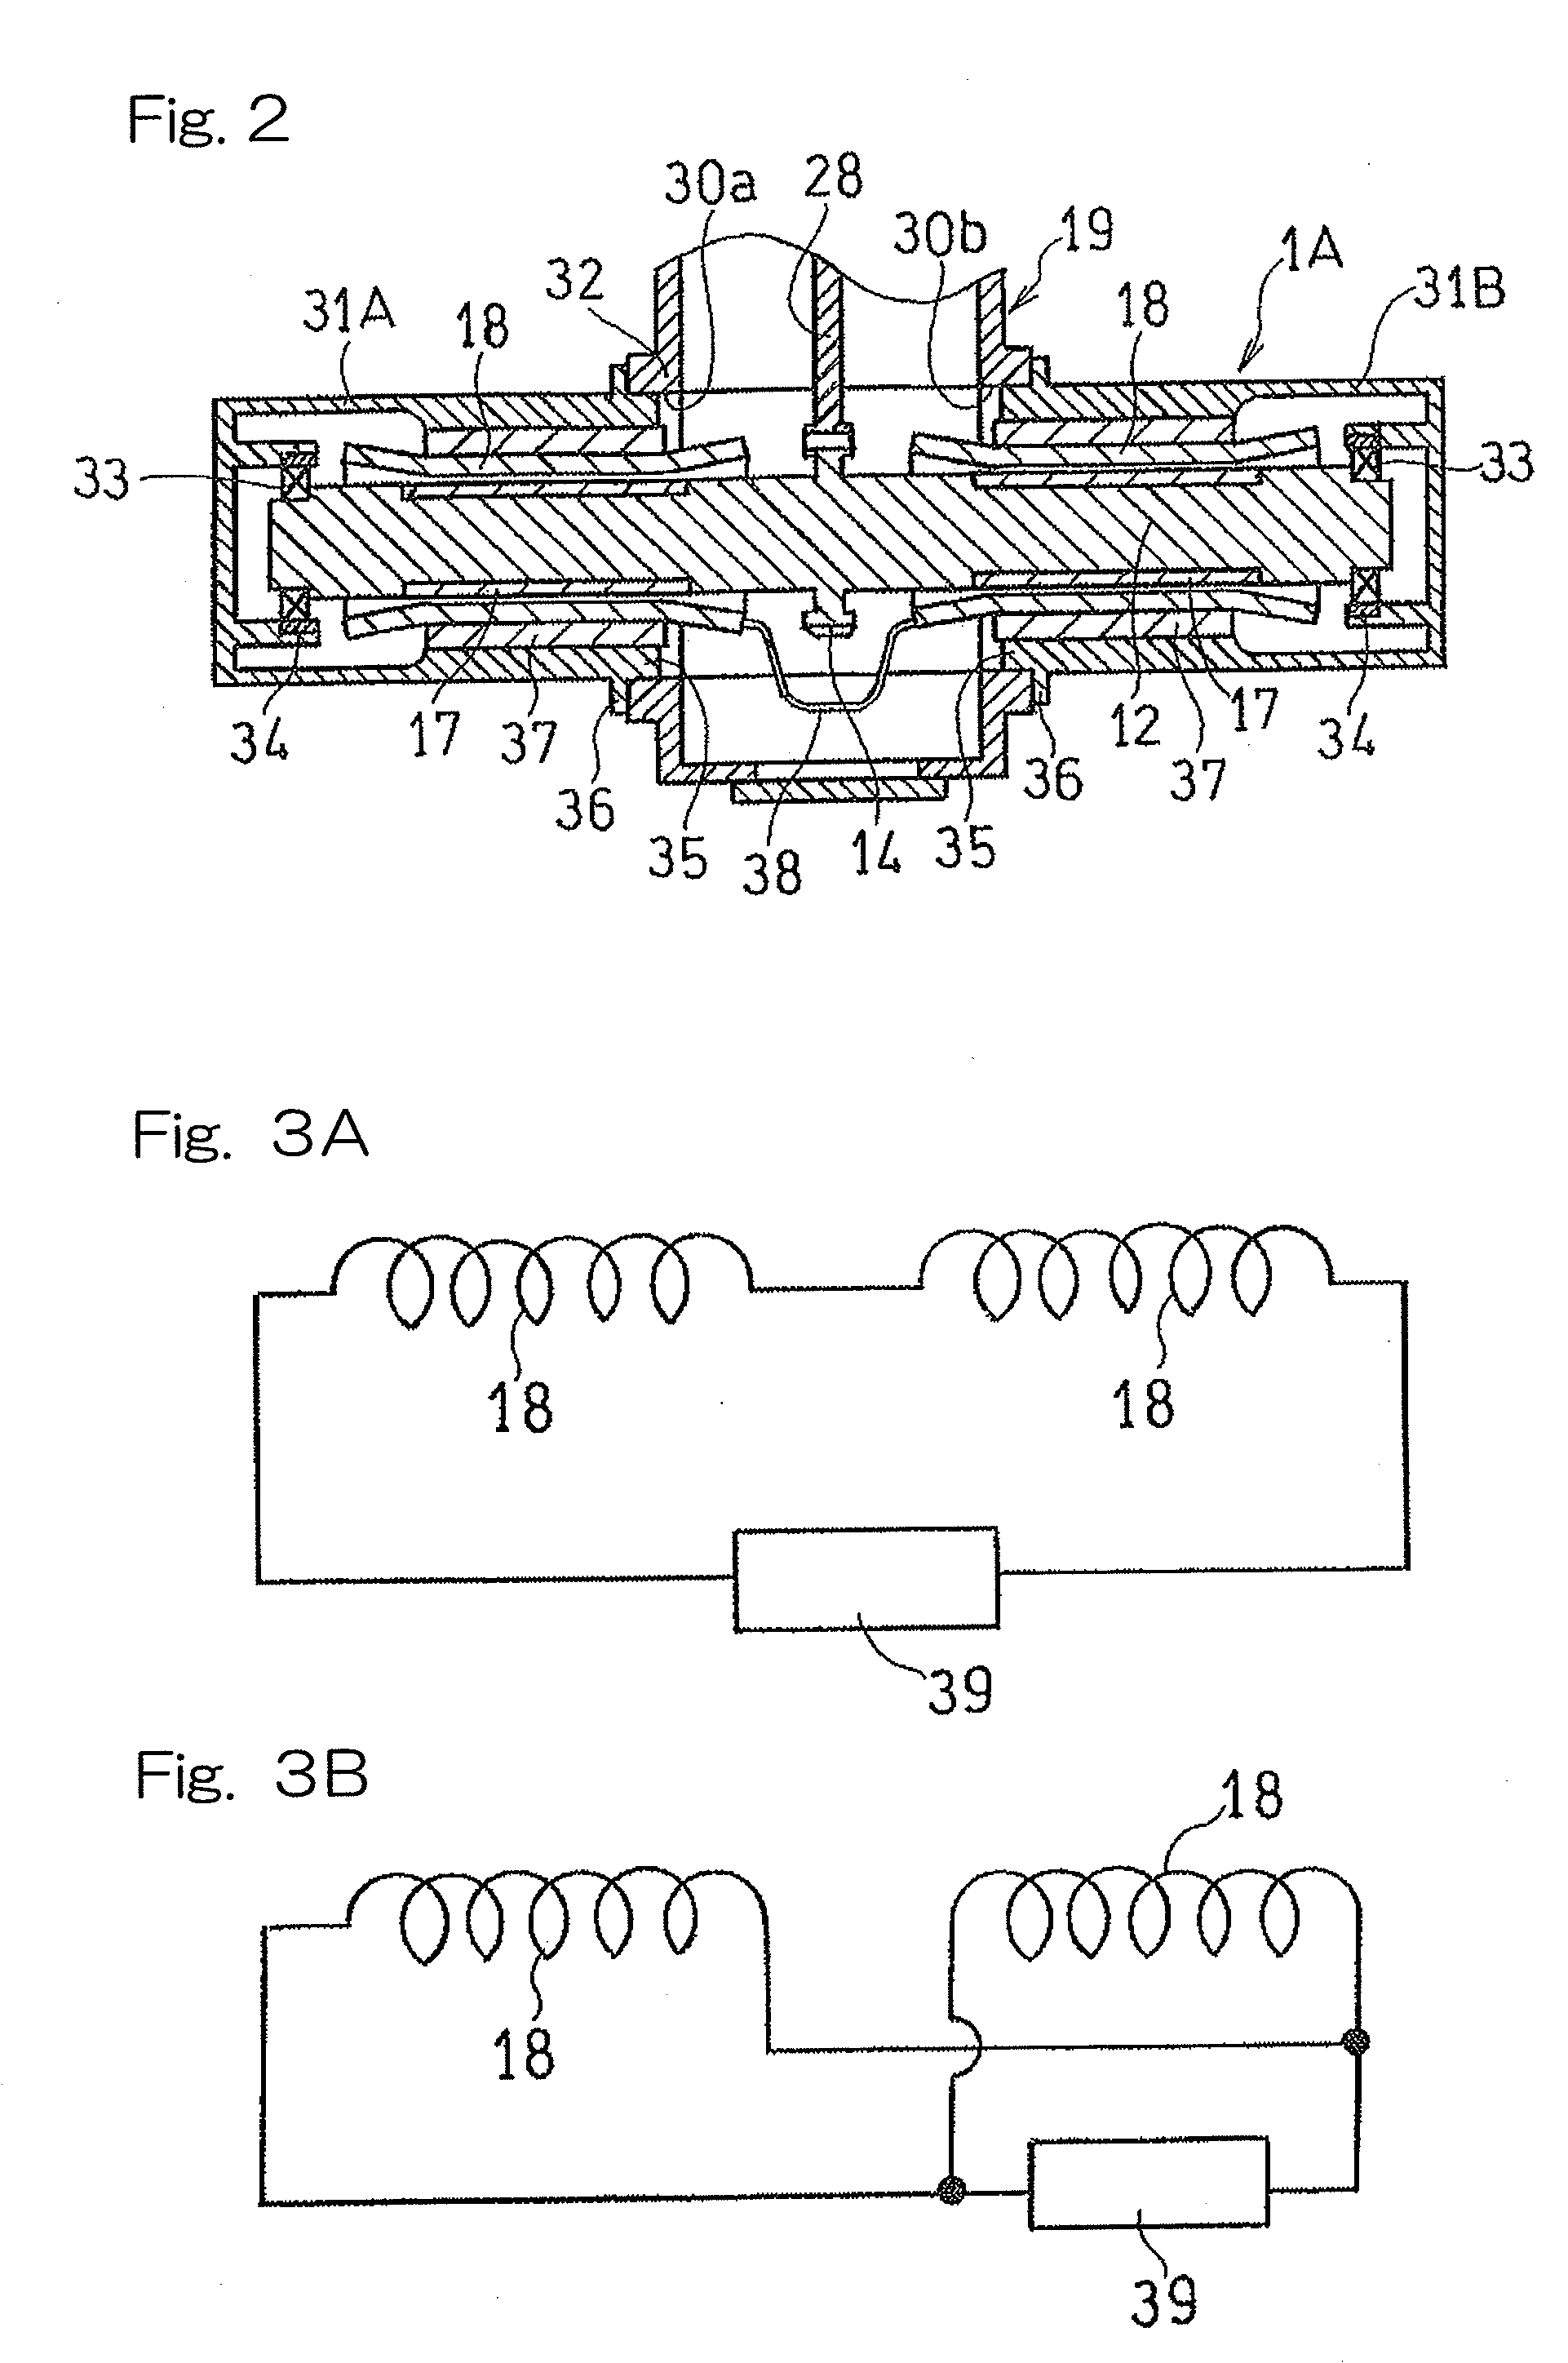 Power generation unit of integrated gearbox design for aircraft engine